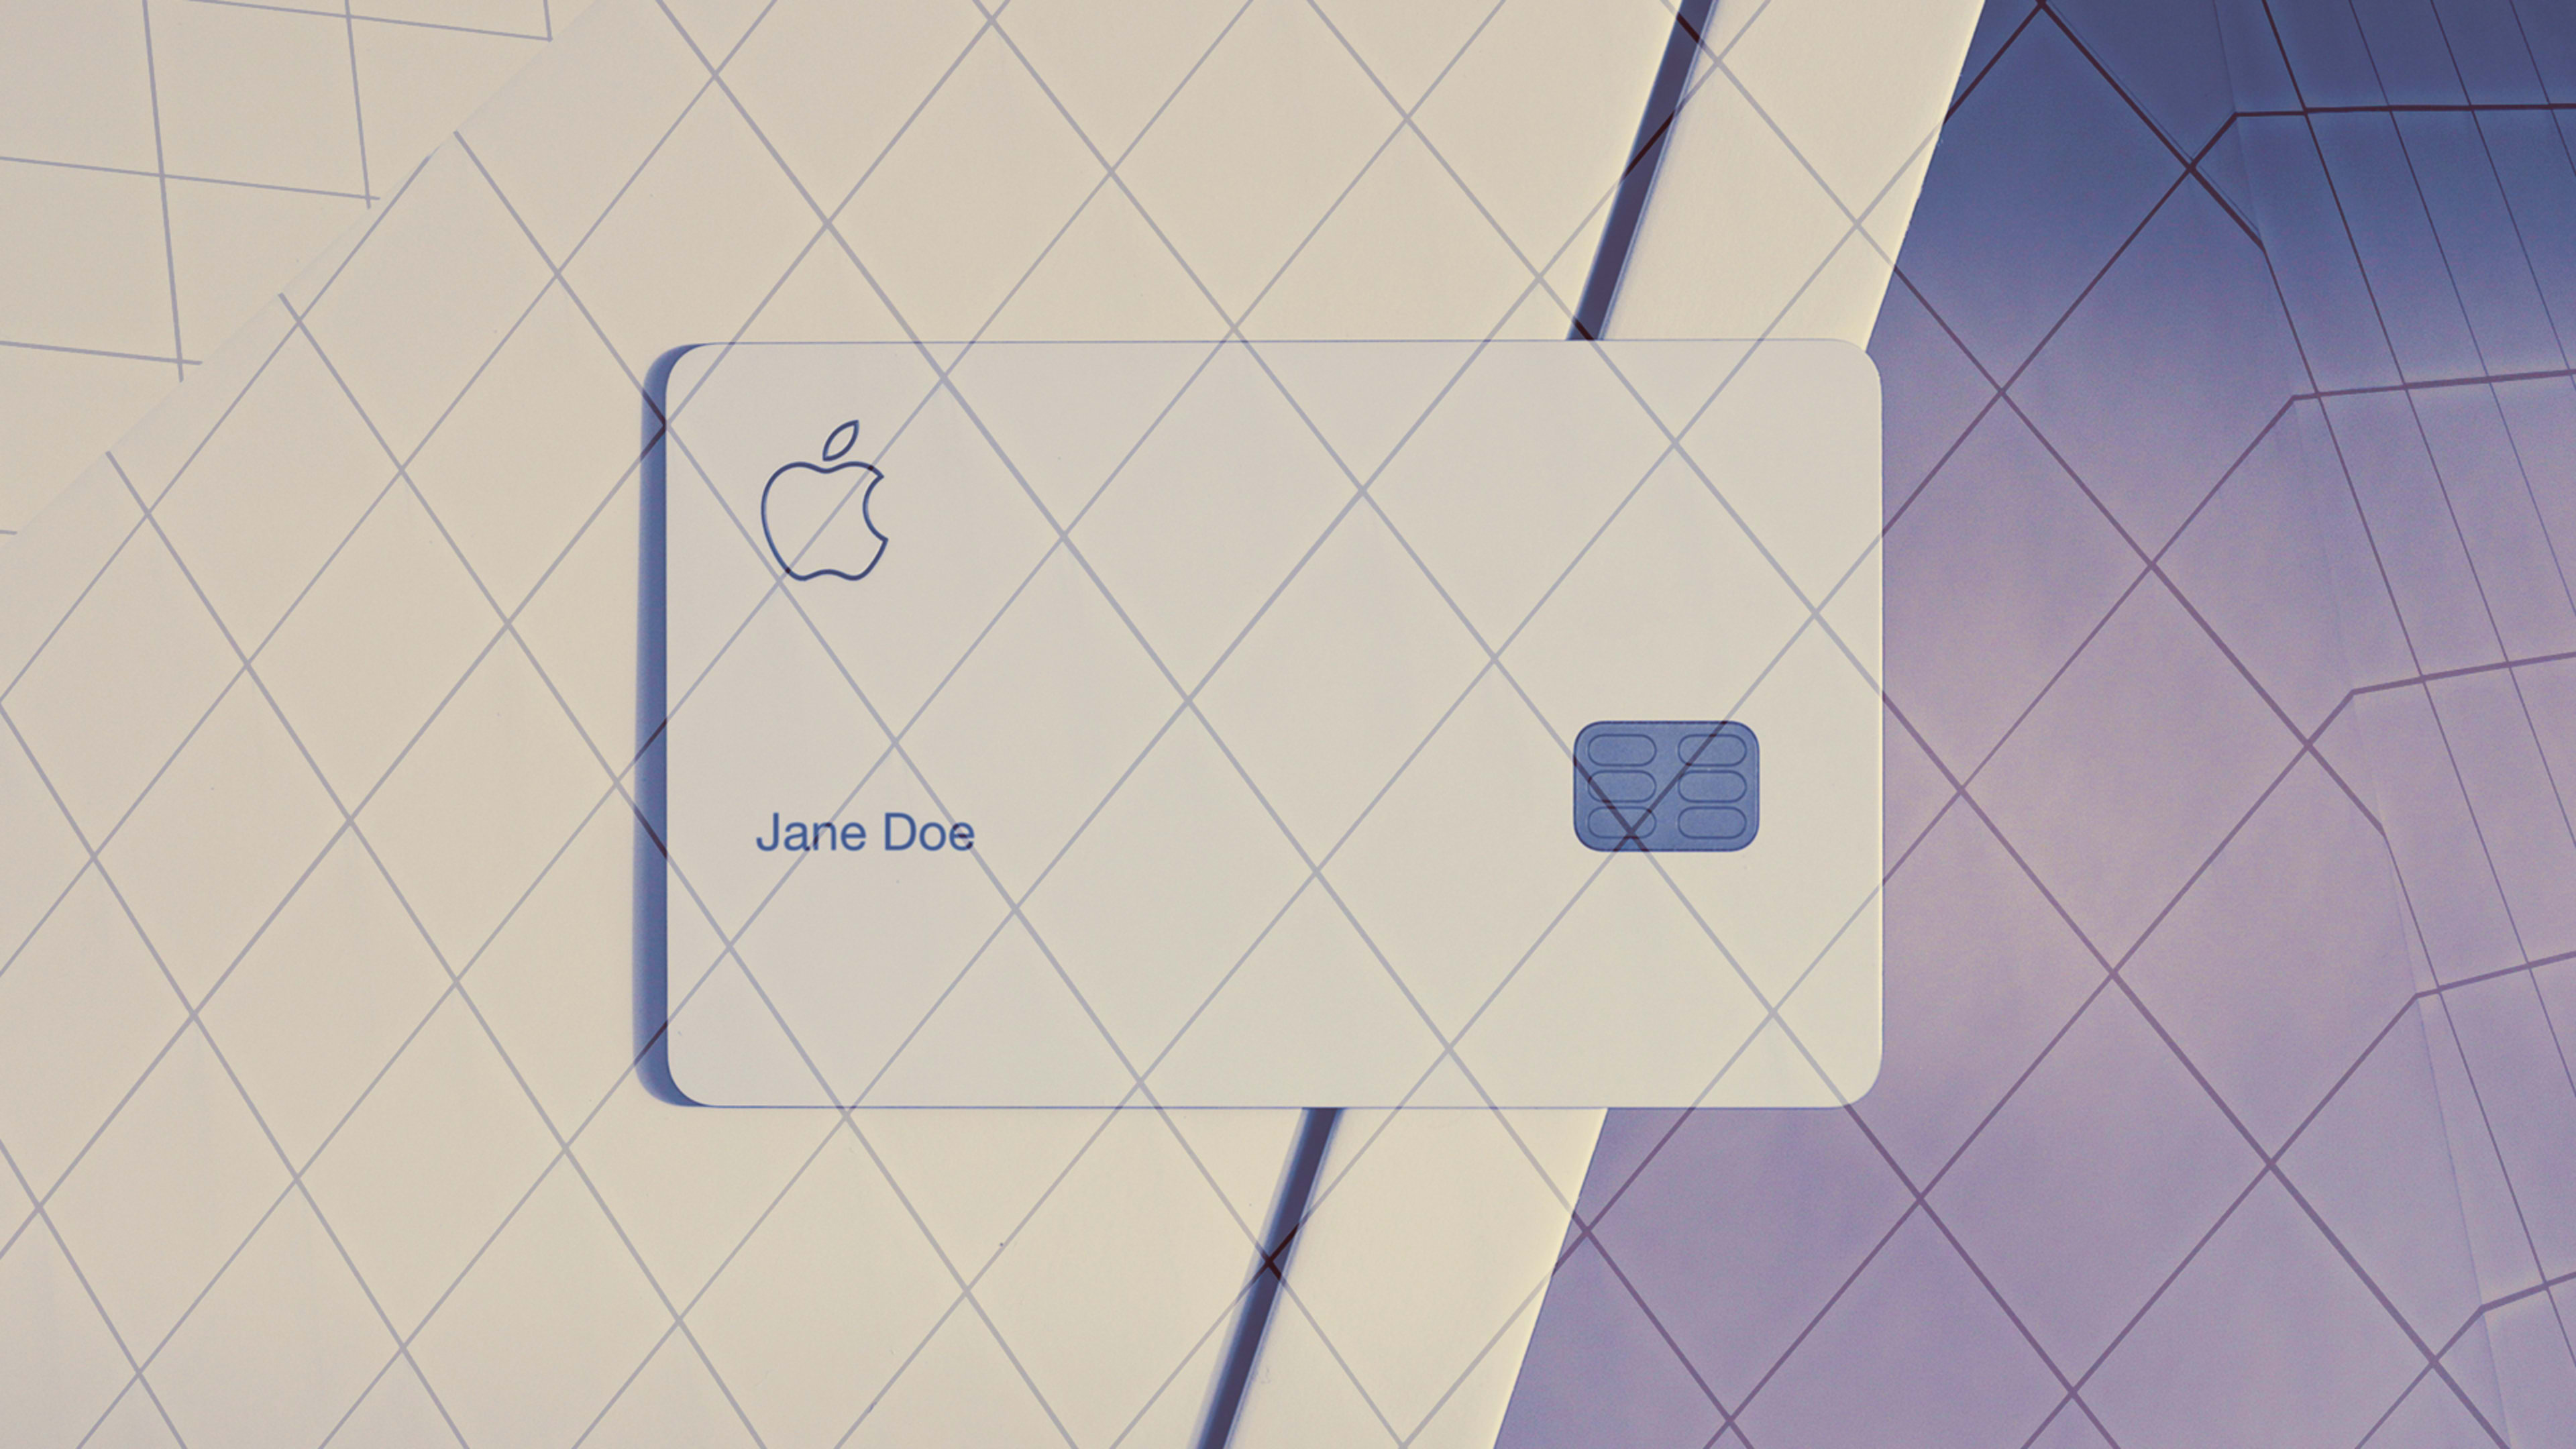 Apple now allows Apple Card users to export their transactions to a spreadsheet. Here’s how